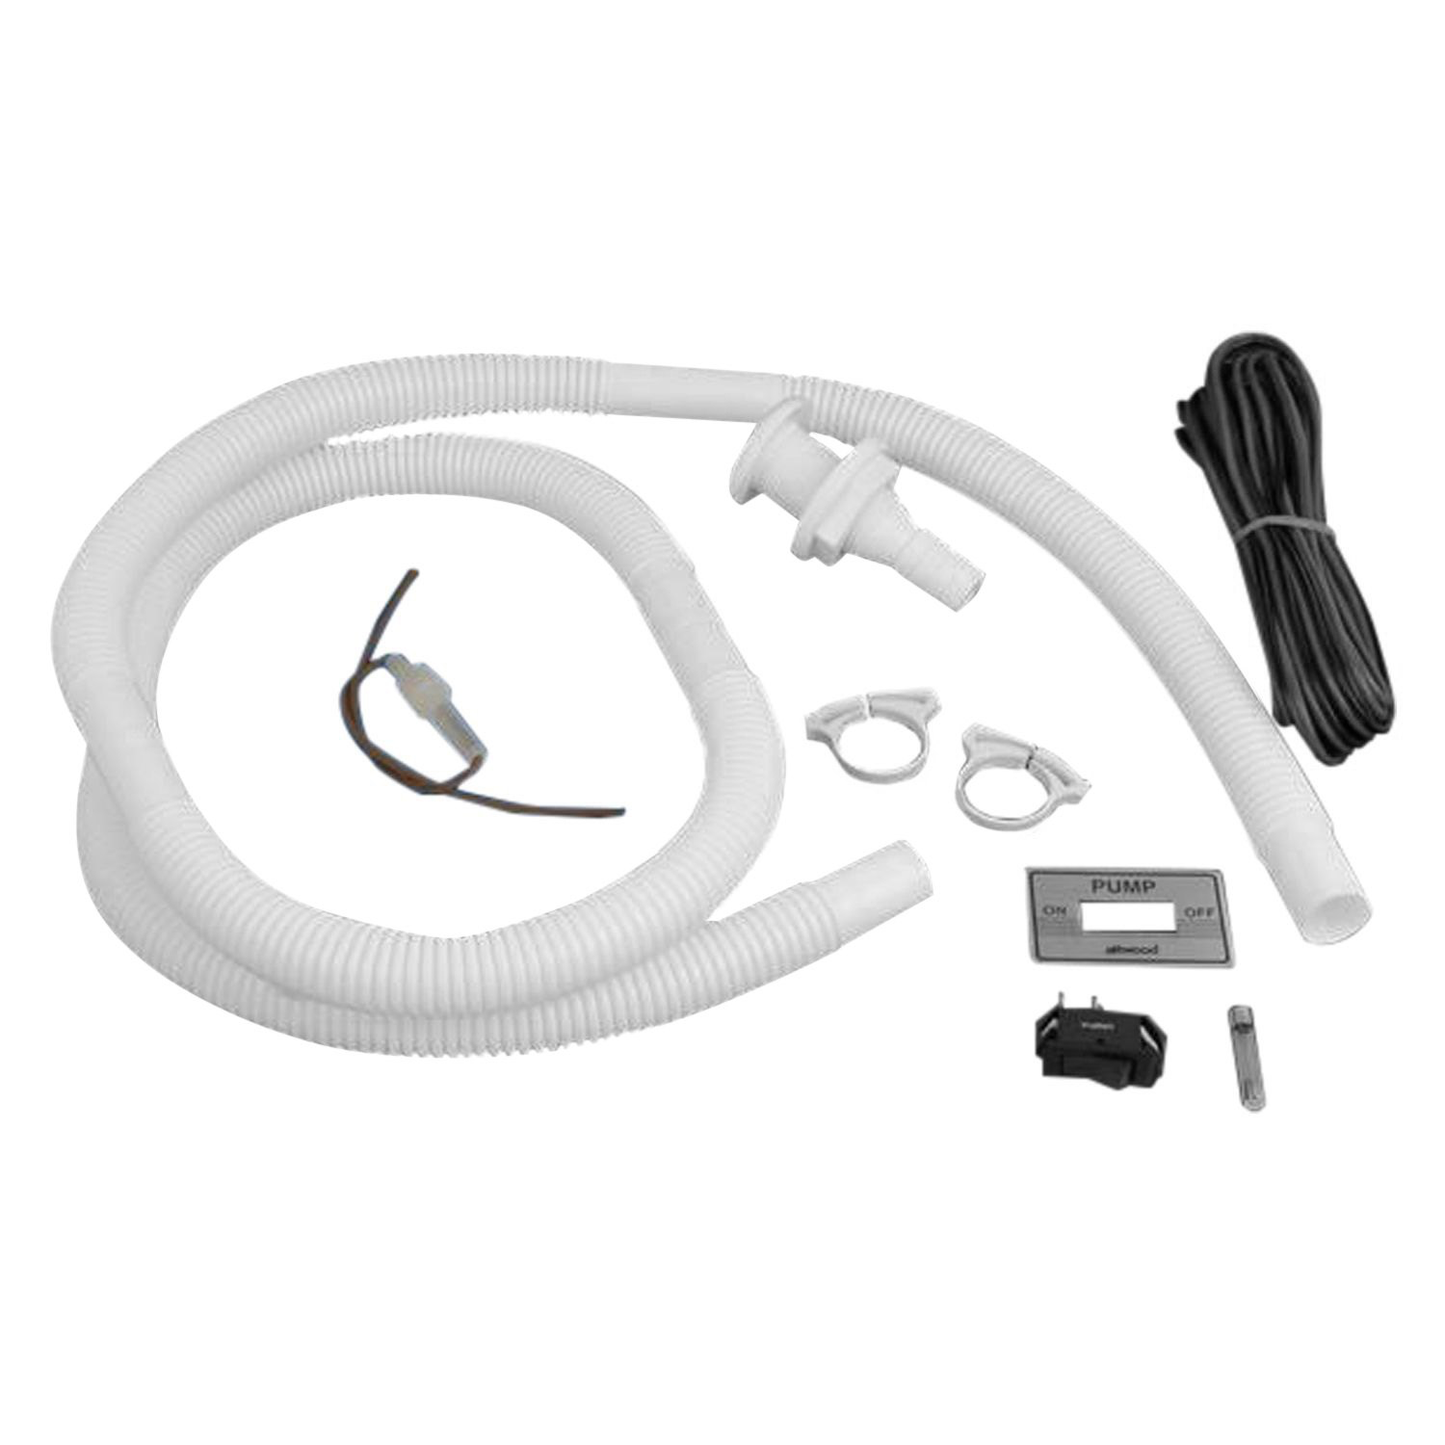 Attwood Bilge Pump Install Kit With Switch 3/4" Hose Clamps